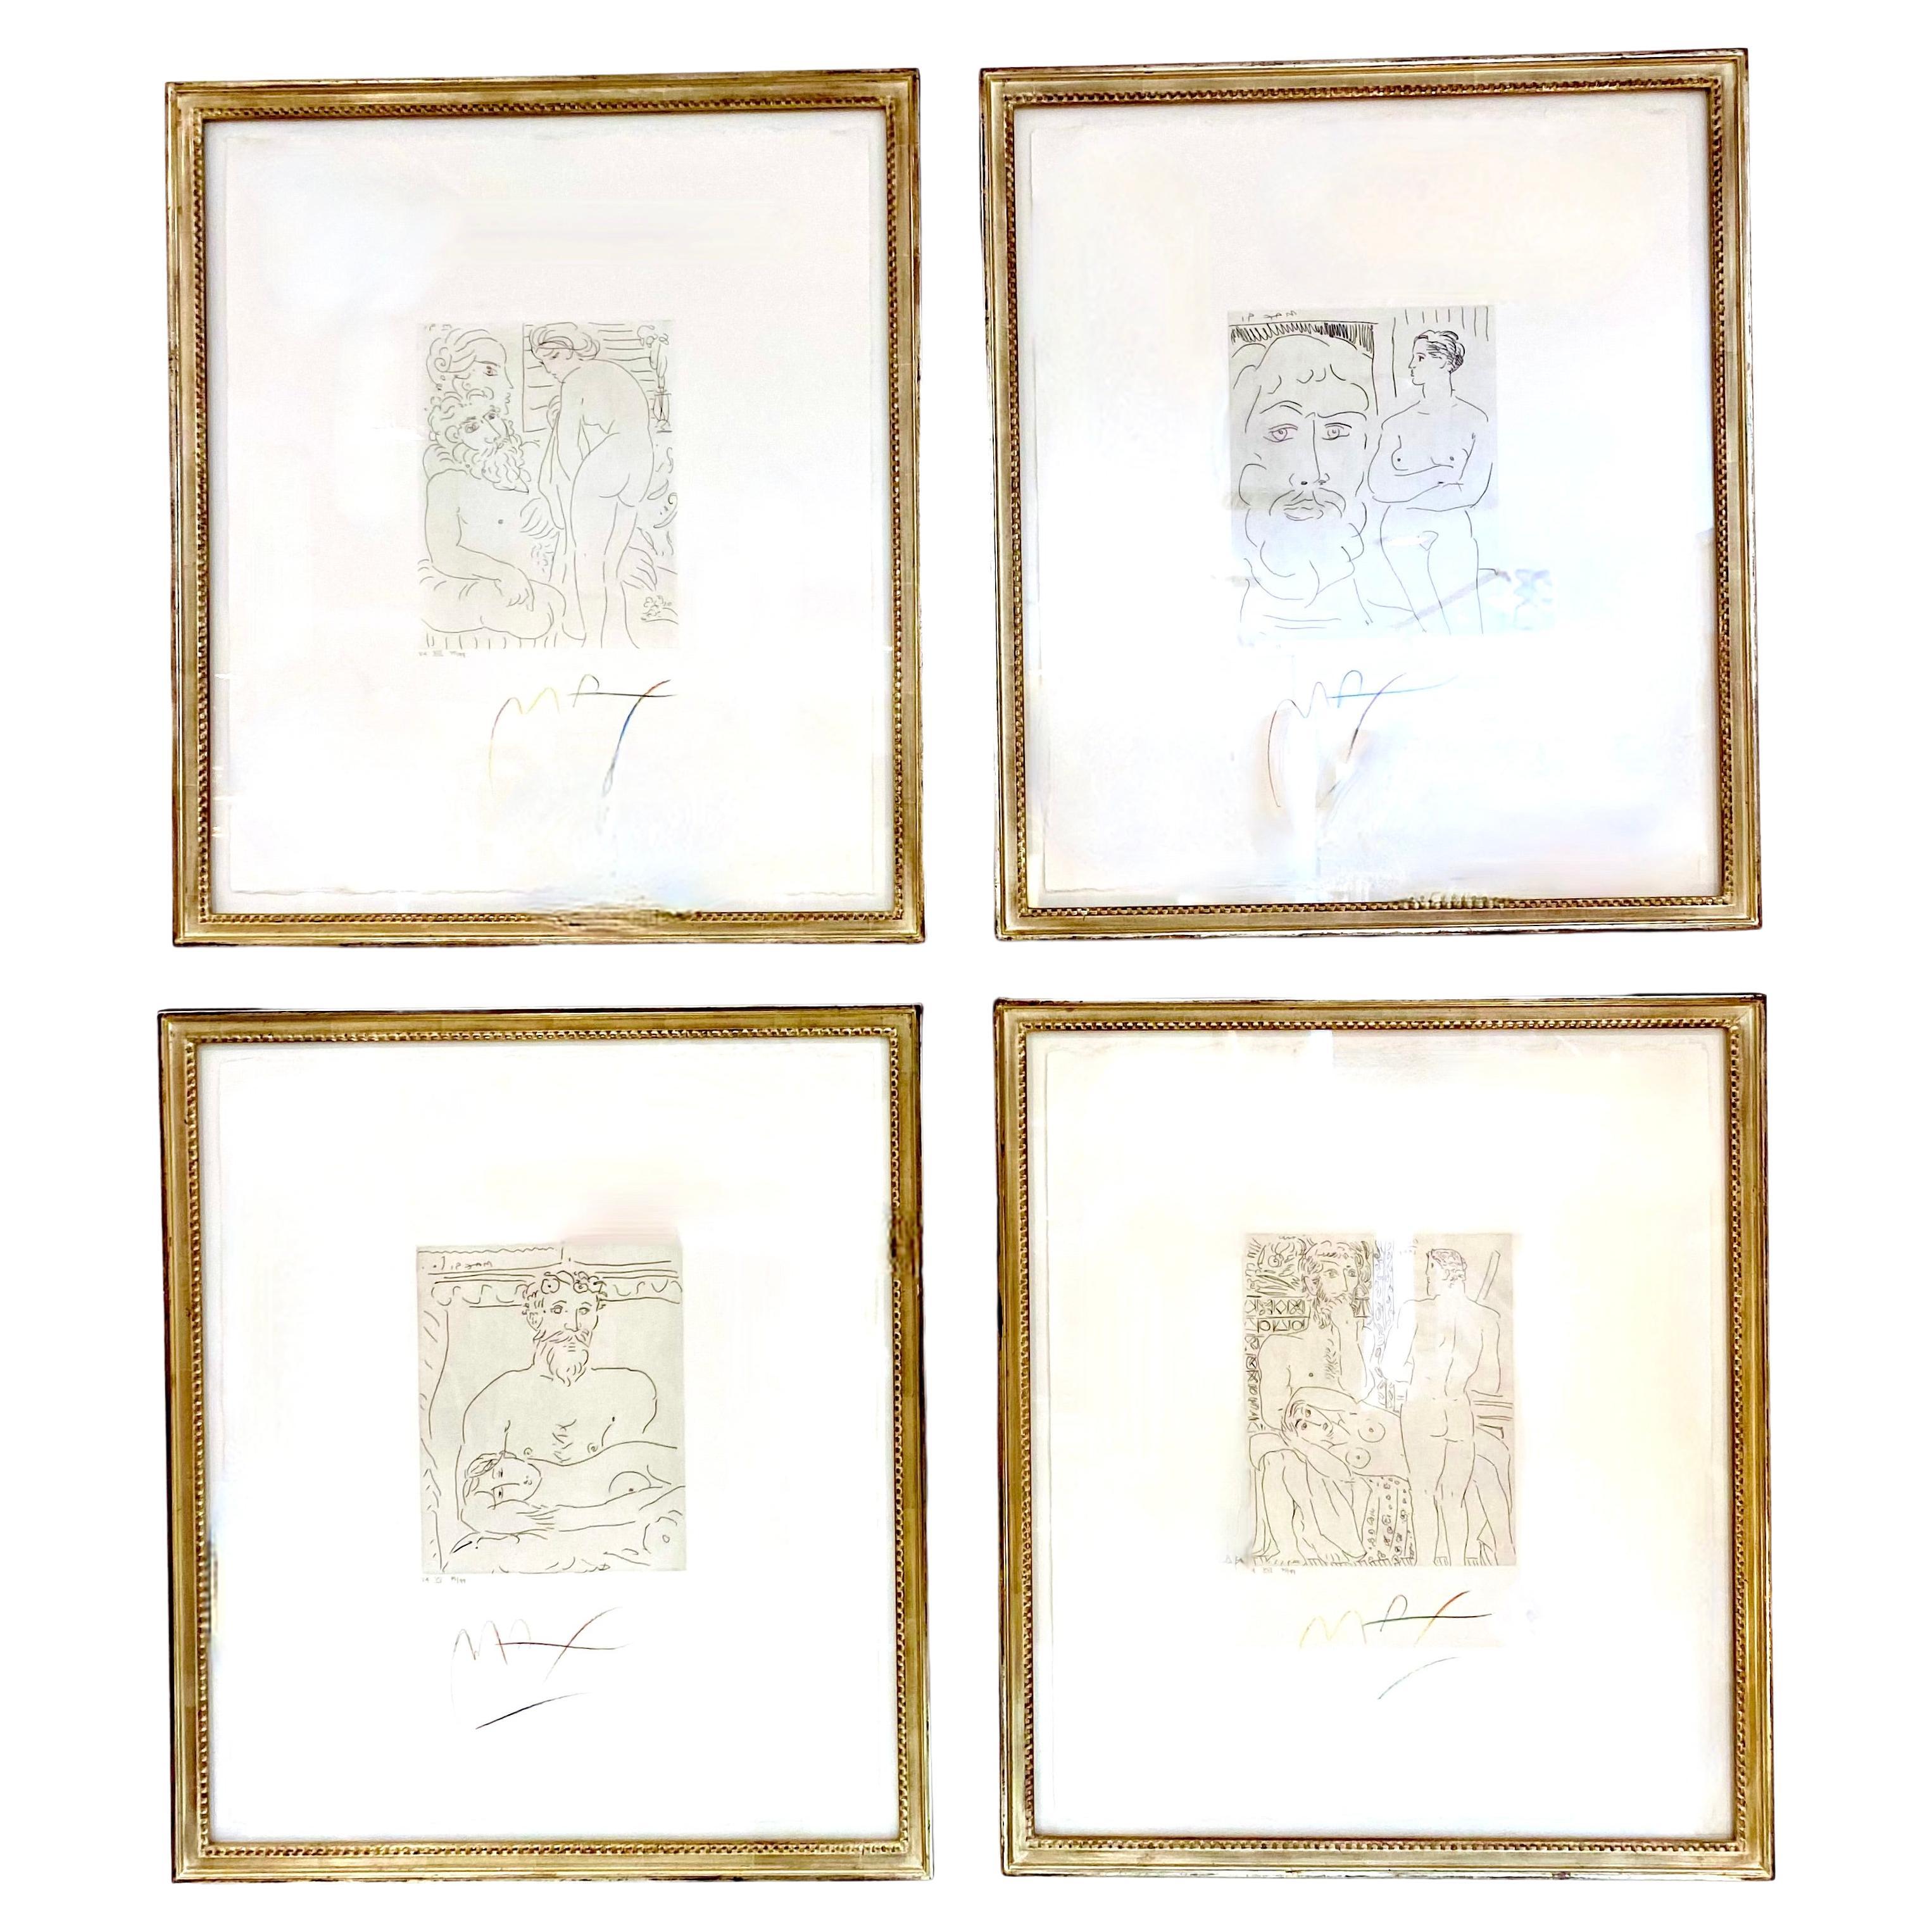 These lithographs are from the series entitled, 